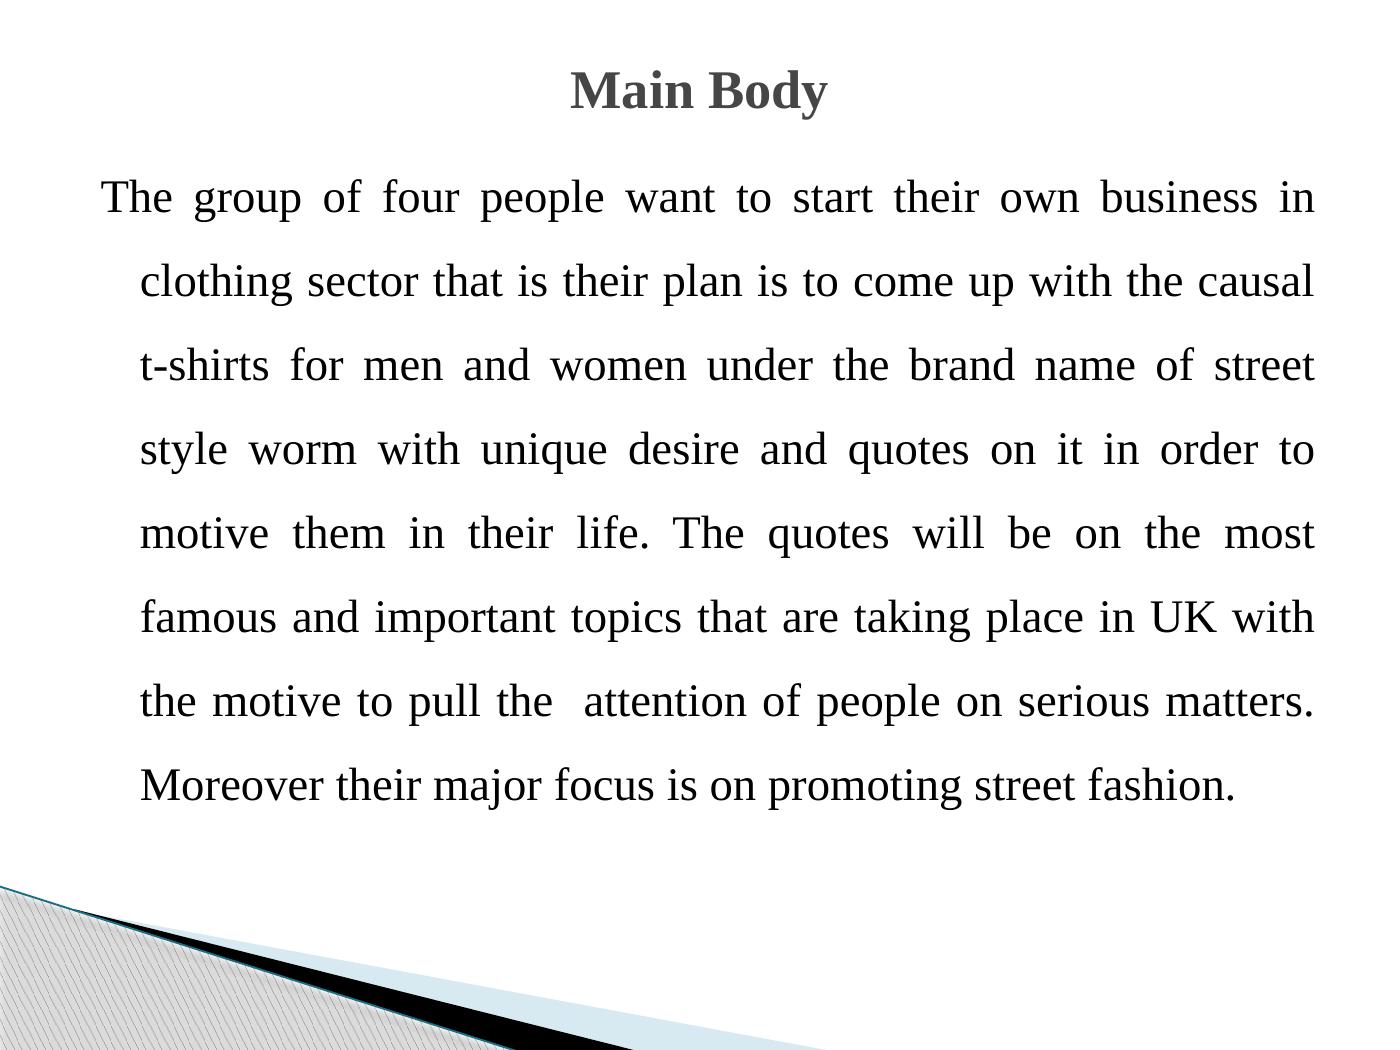 Business Plan Pitch for Clothing Sector_4